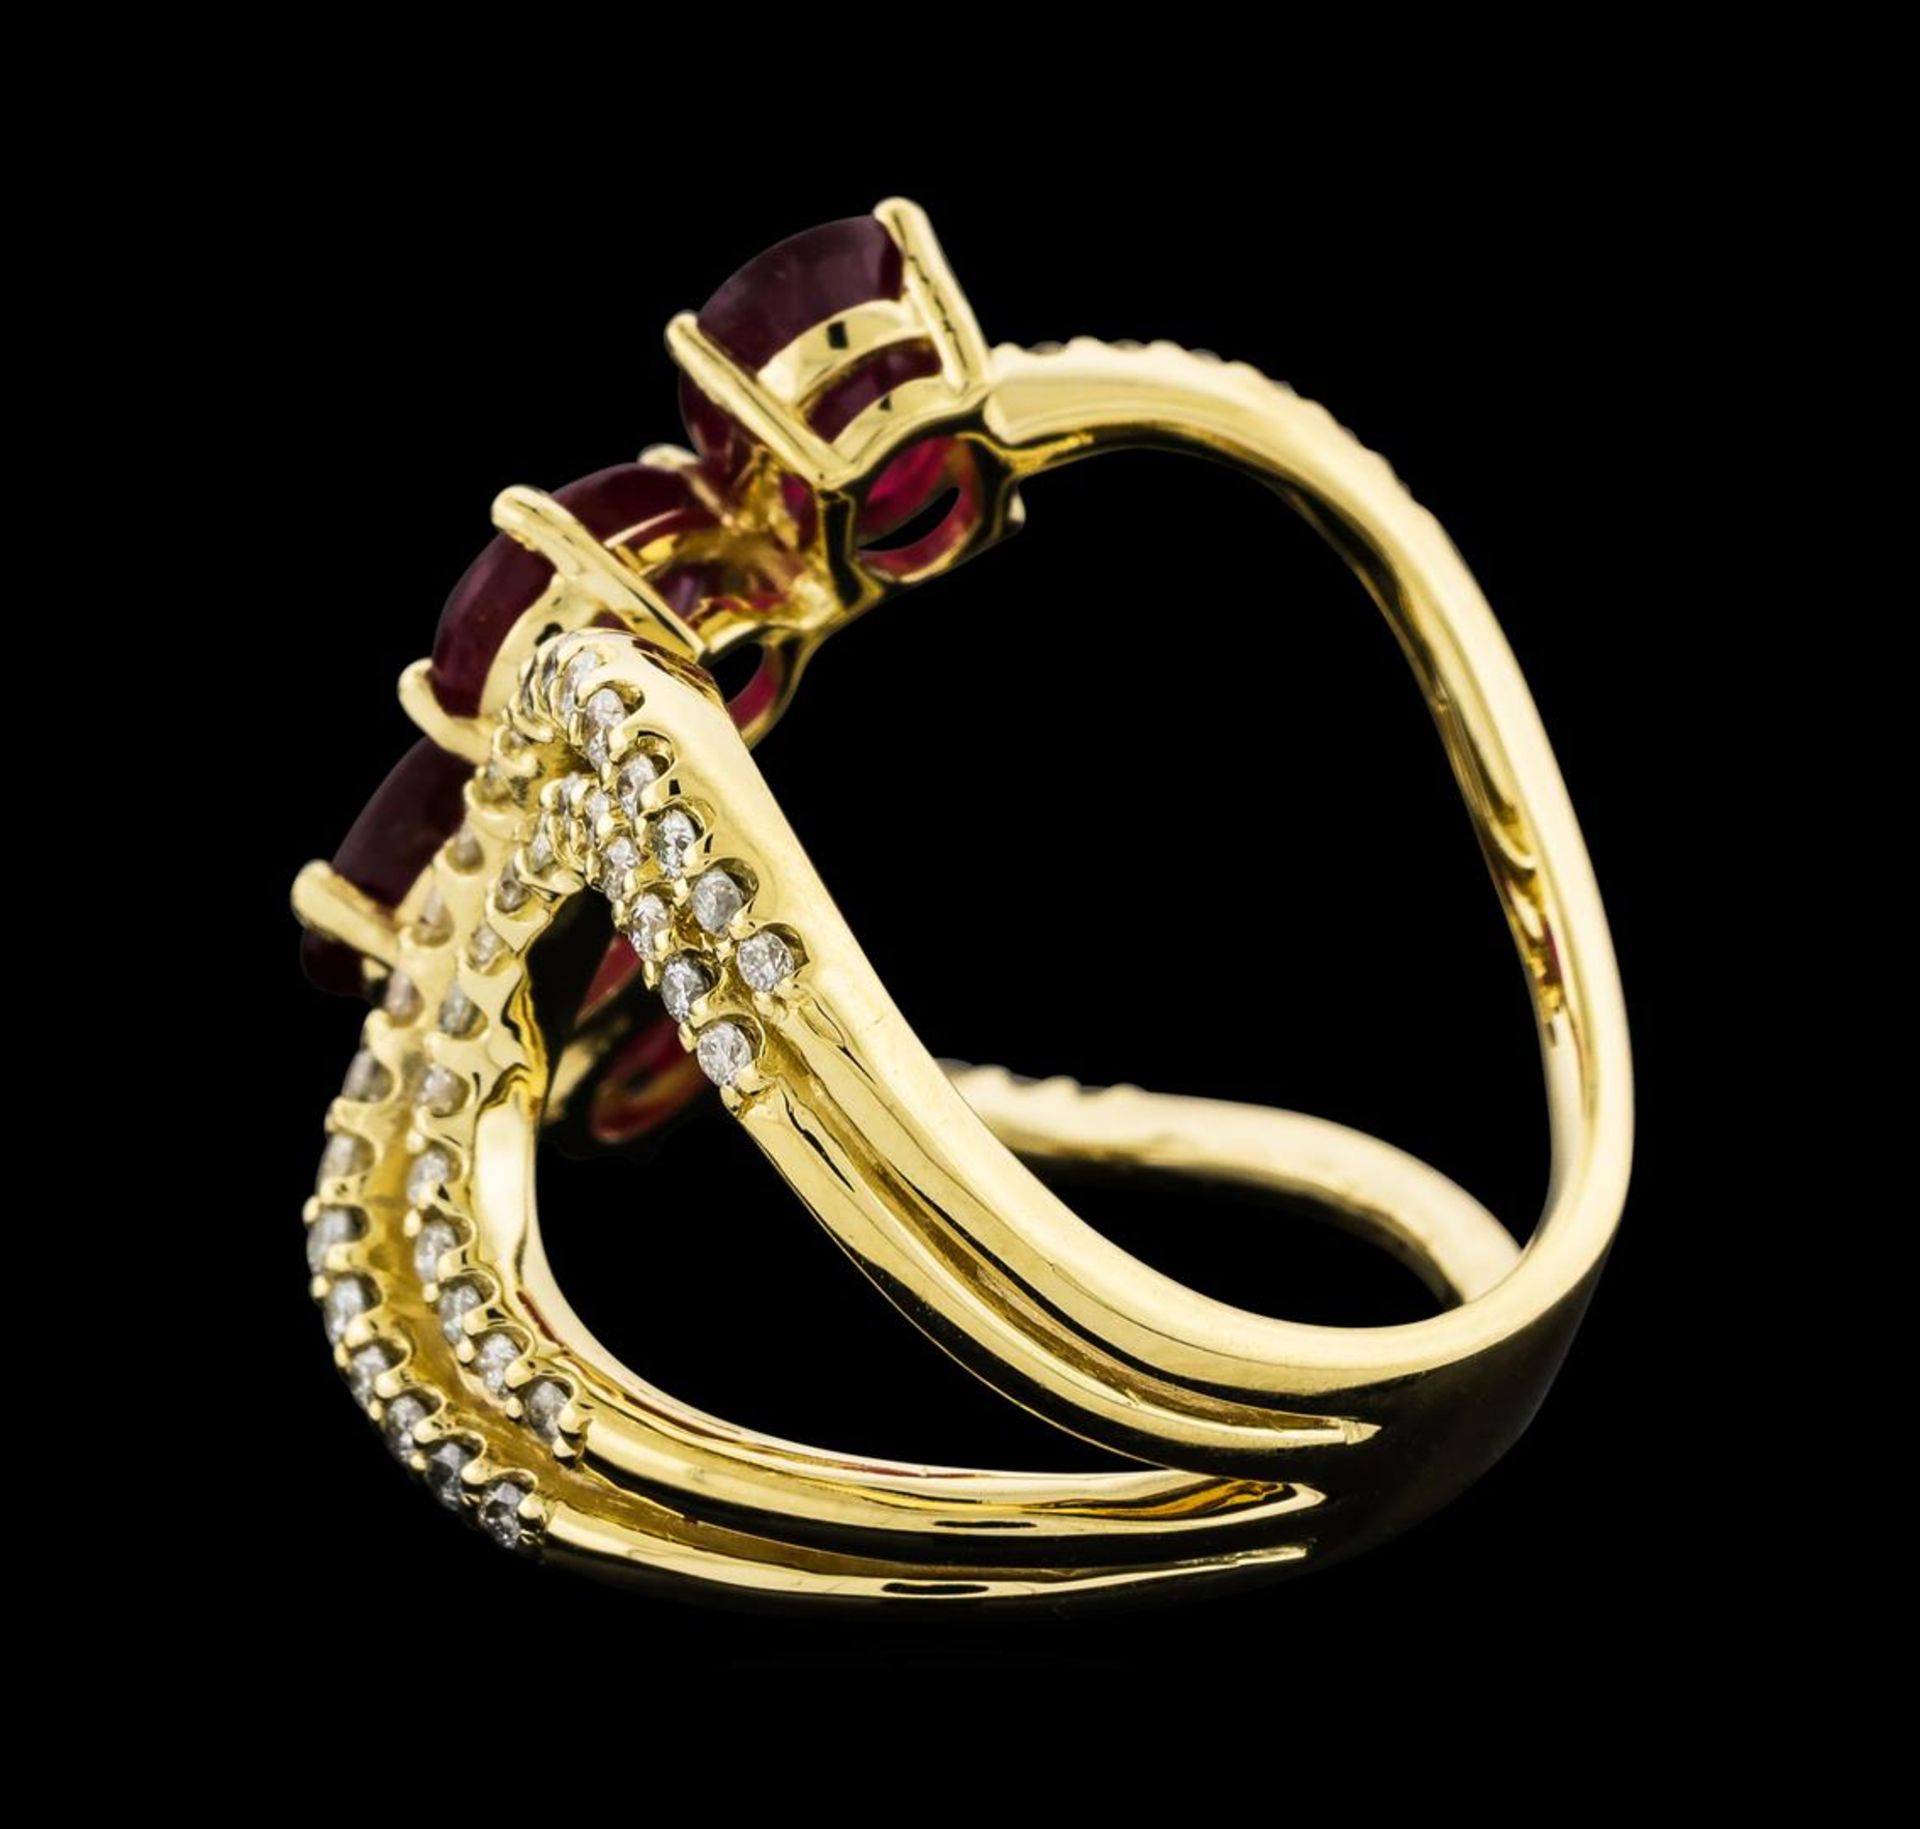 4.73 ctw Ruby and Diamond Ring - 14KT Yellow Gold - Image 3 of 4